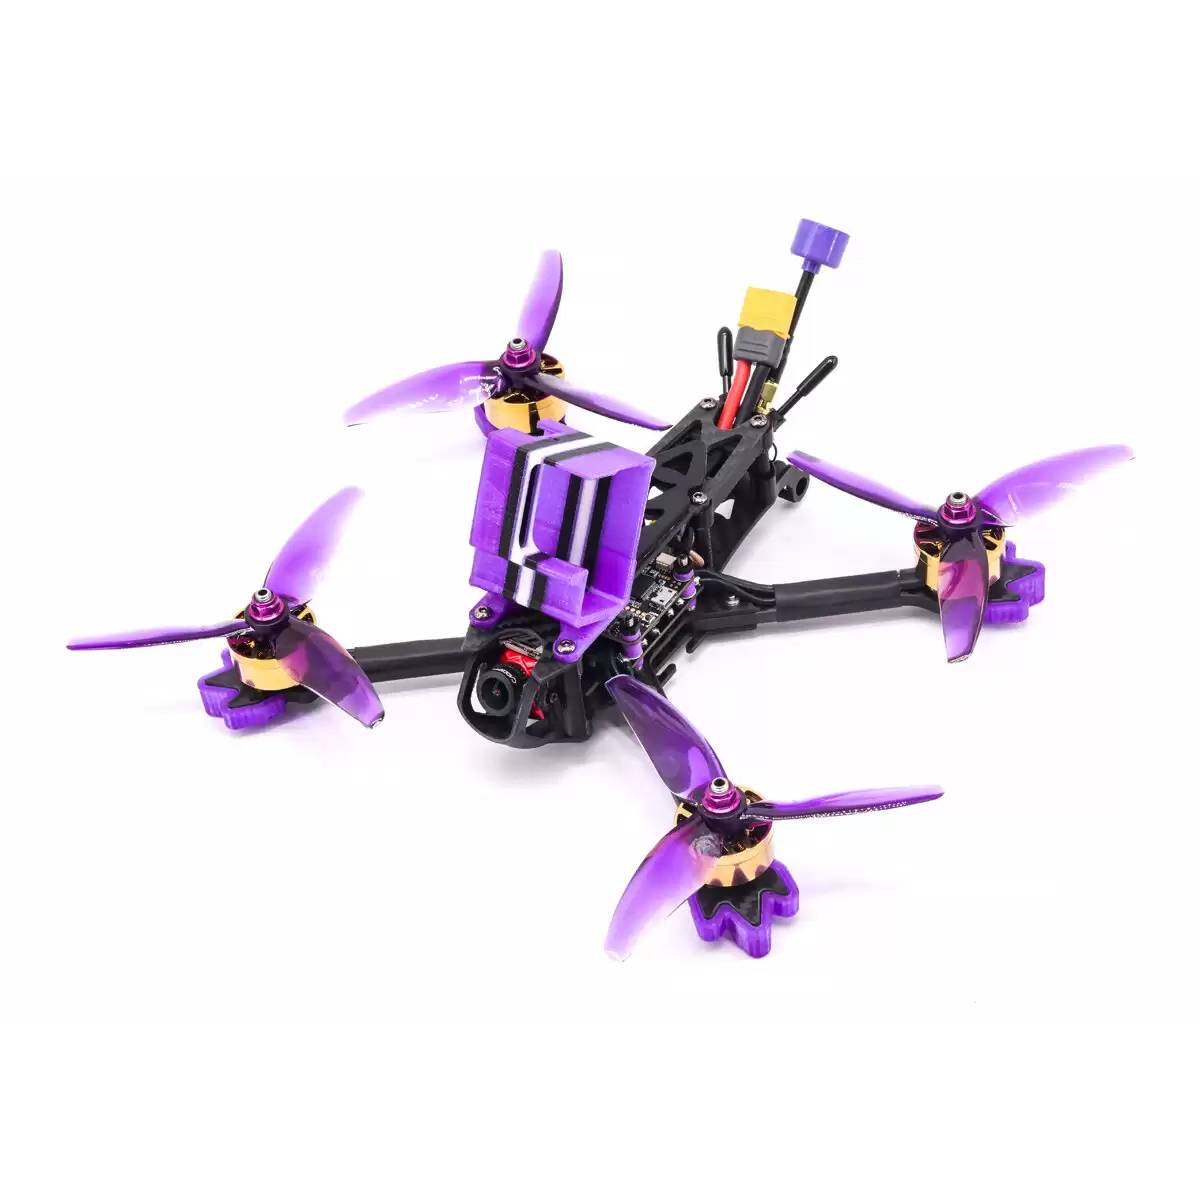 Order In Just $151.20 20% Off For Eachine Lal 5style 220mm 6s Freestyle 5 Inch Fpv Racing Drone Pnp/bnf F4 Bluetooth Fc Caddx Ratel 2307 1850kv Motor 50a Blheli_32 Esc With This Coupon At Banggood